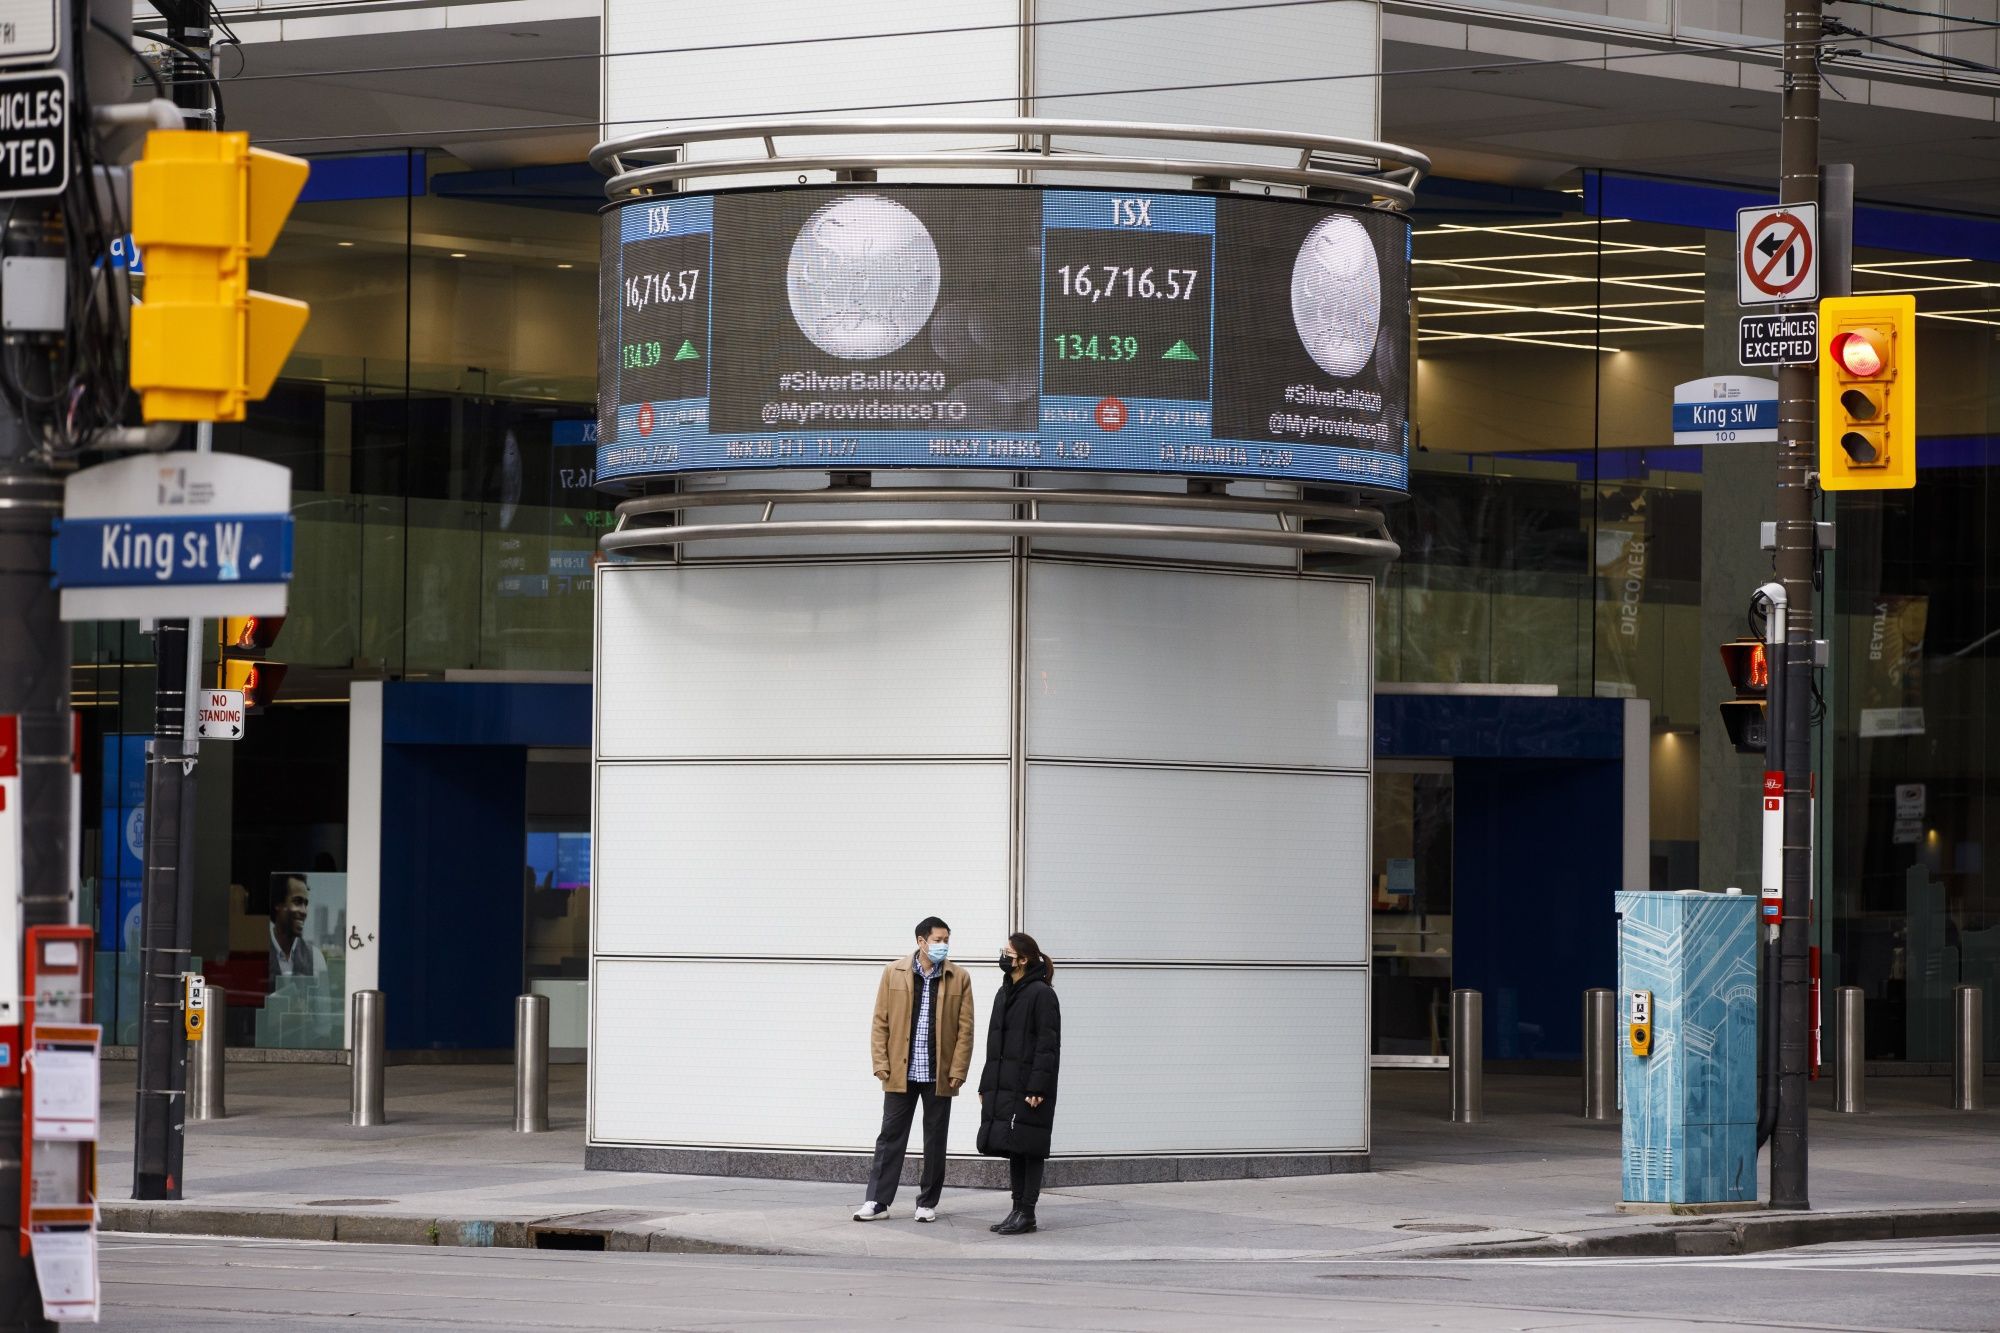 Pedestrians wearing protective masks stand underneath a ticker for the Toronto Stock Exchange in Toronto, Ontario, Canada, on Friday, Nov. 13, 2020. The city of Toronto has said it's forcing casinos, meeting centers, indoor bars and restaurants to stay closed into December as Covid-19 cases continue to rise throughout the city and province.